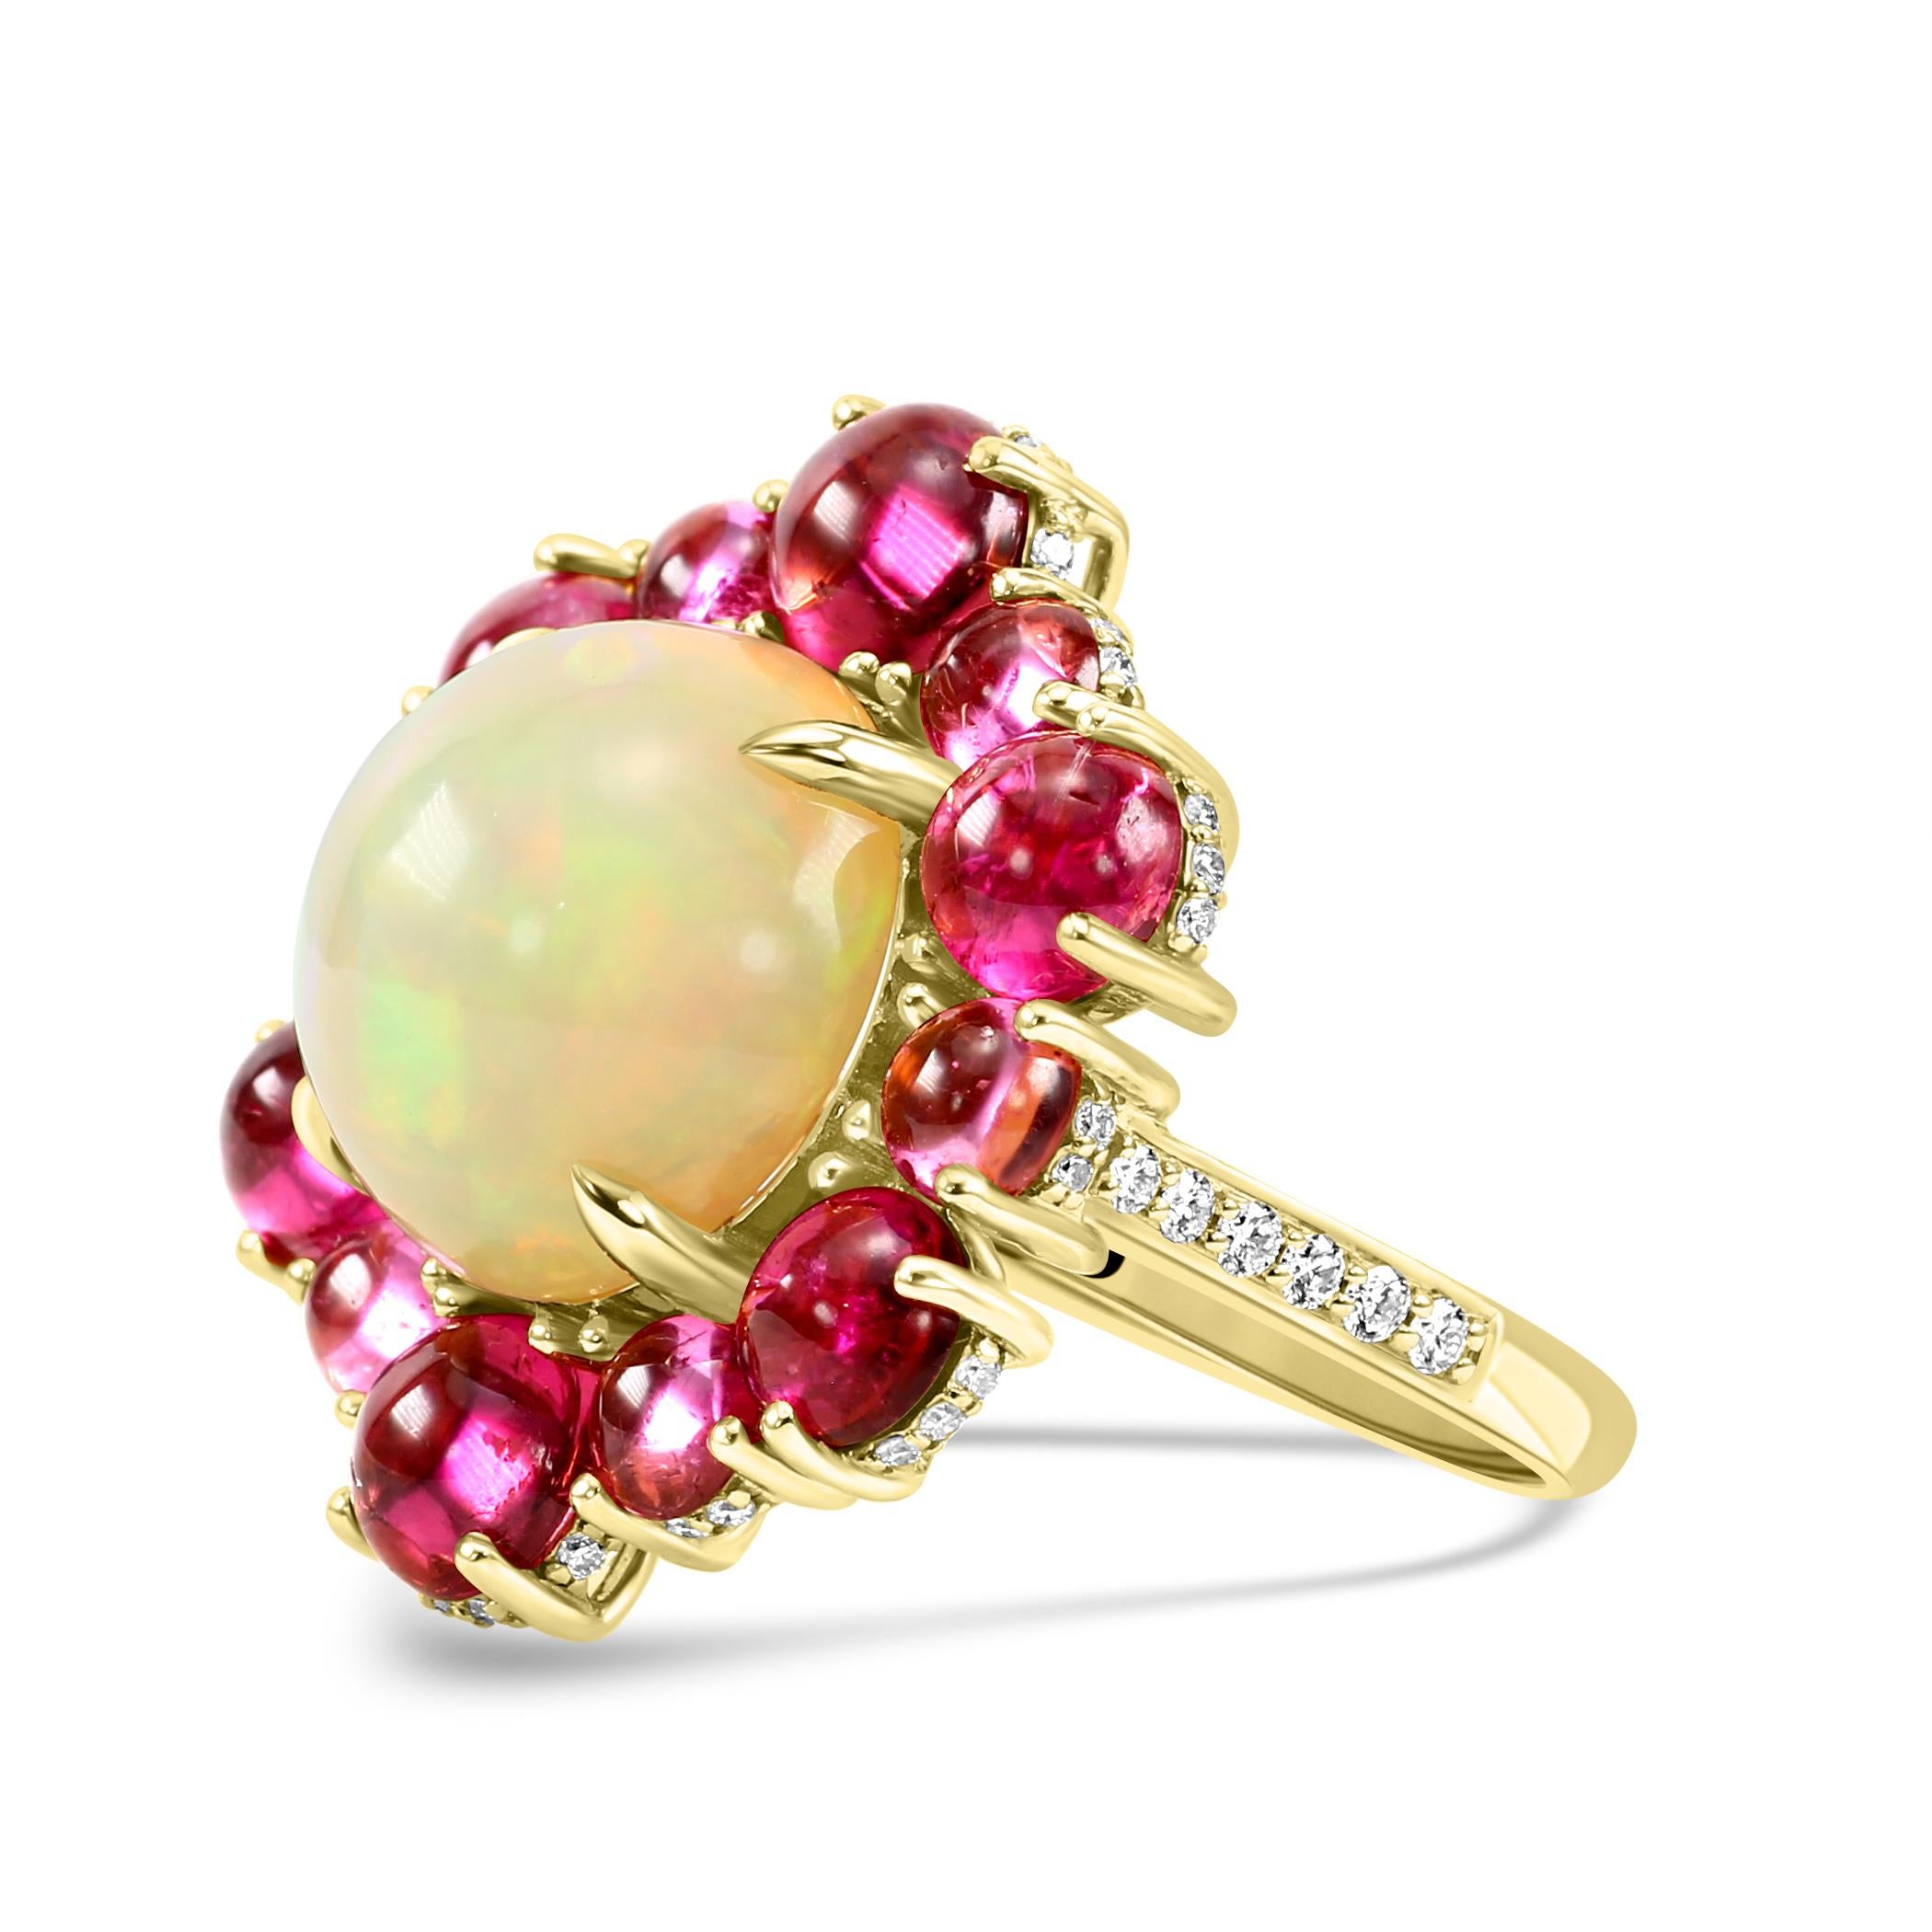 Immerse yourself in Osiyan's beautiful world of color with our Opal & Rubellite fashion halo ring, a vibrant and captivating piece designed to celebrate individuality and elegance.

The center stone of this fashion-forward ring is the Opal, known